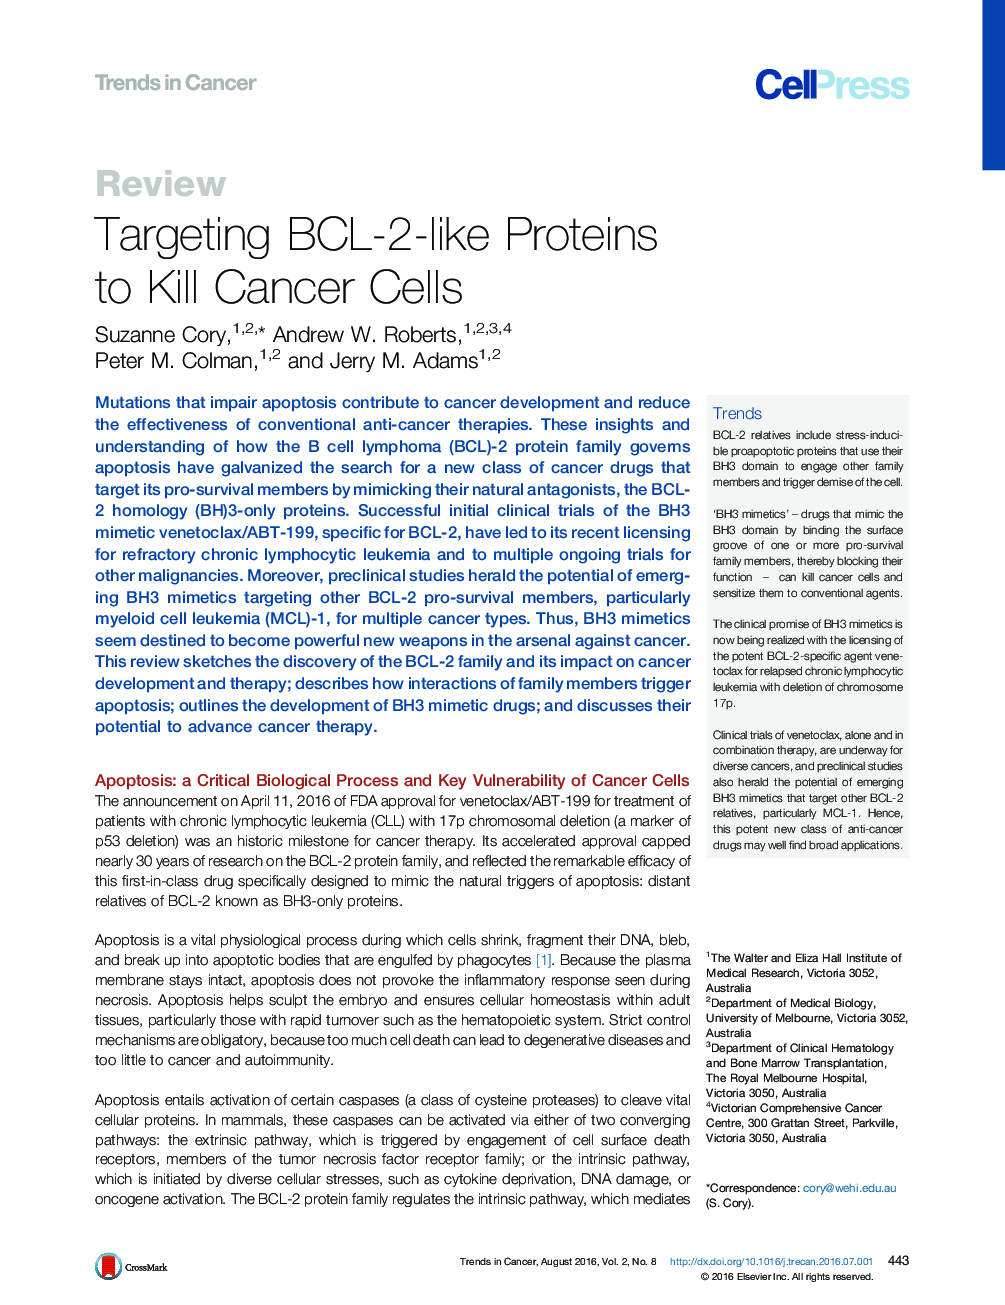 Targeting BCL-2-like Proteins to Kill Cancer Cells